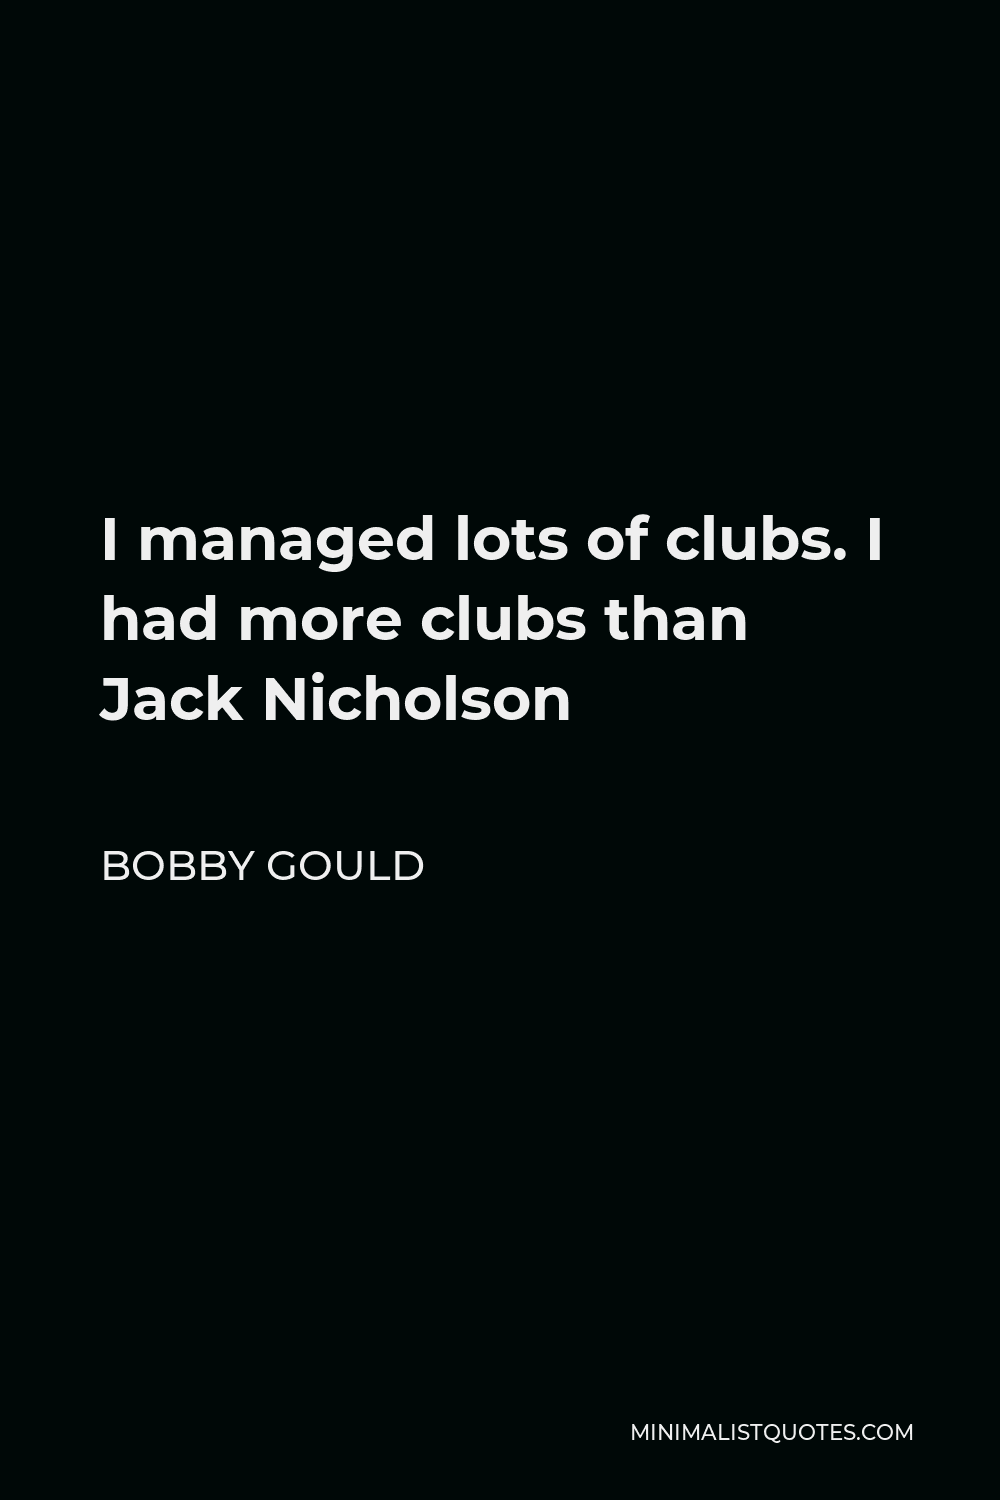 Bobby Gould Quote - I managed lots of clubs. I had more clubs than Jack Nicholson